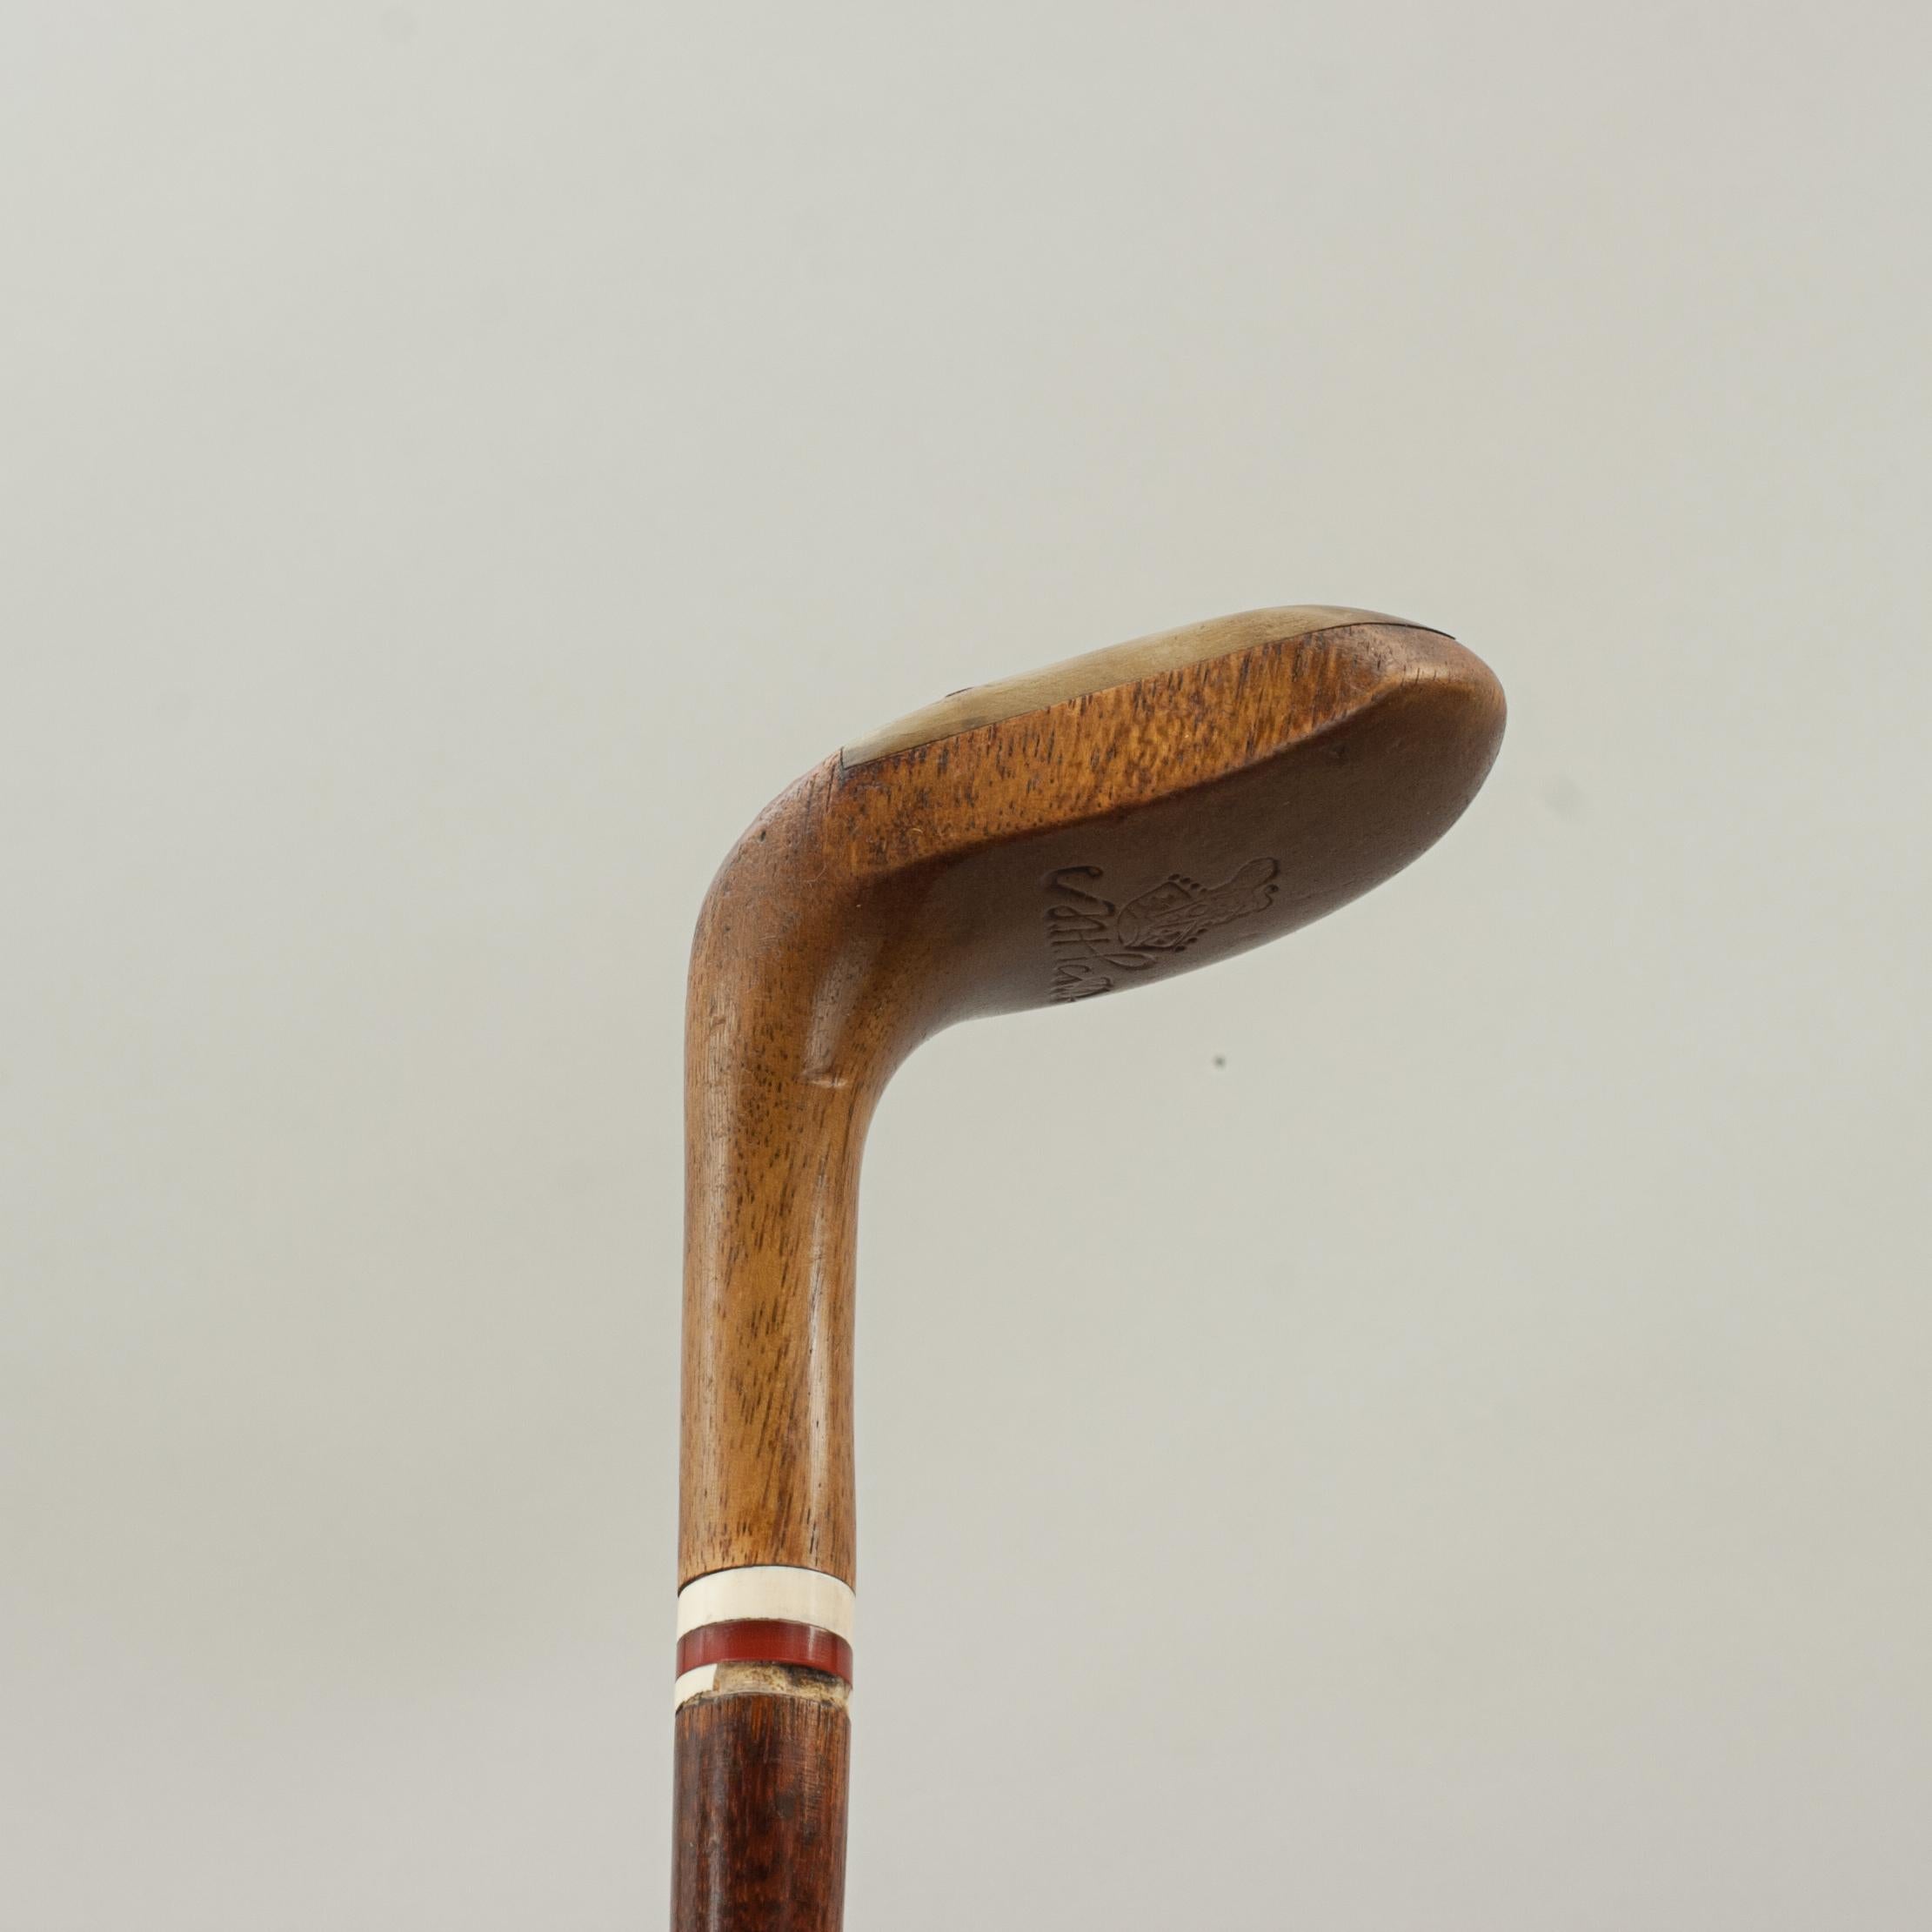 Antique Sunday Club, Golf Club Walking Stick By A.H. Scott.
A desirable walking cane with the handle in the shape of a golf club head. The gentleman's walking stick has a persimmon socket head handle with a pegged horn insert and a lead weight to